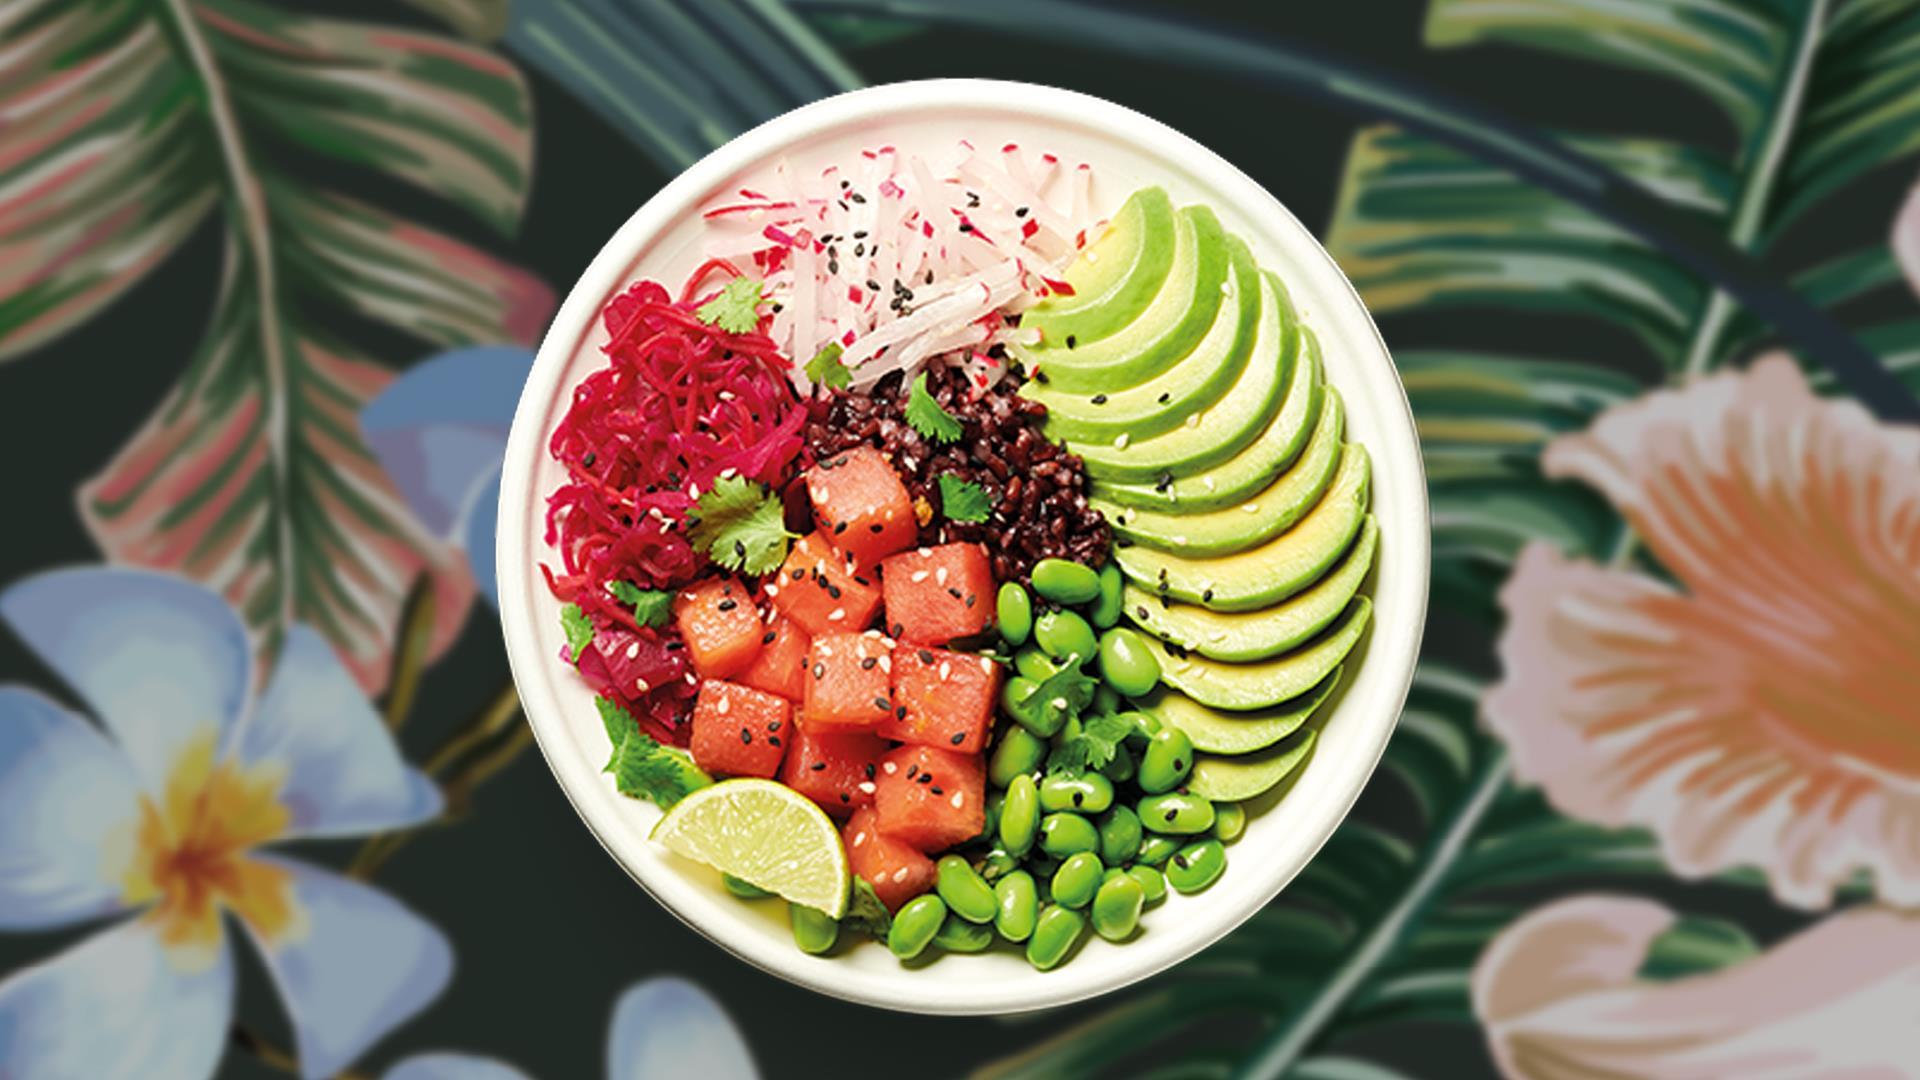 Pret a Manger’s vegan menu now includes these Buddha bowls and poke